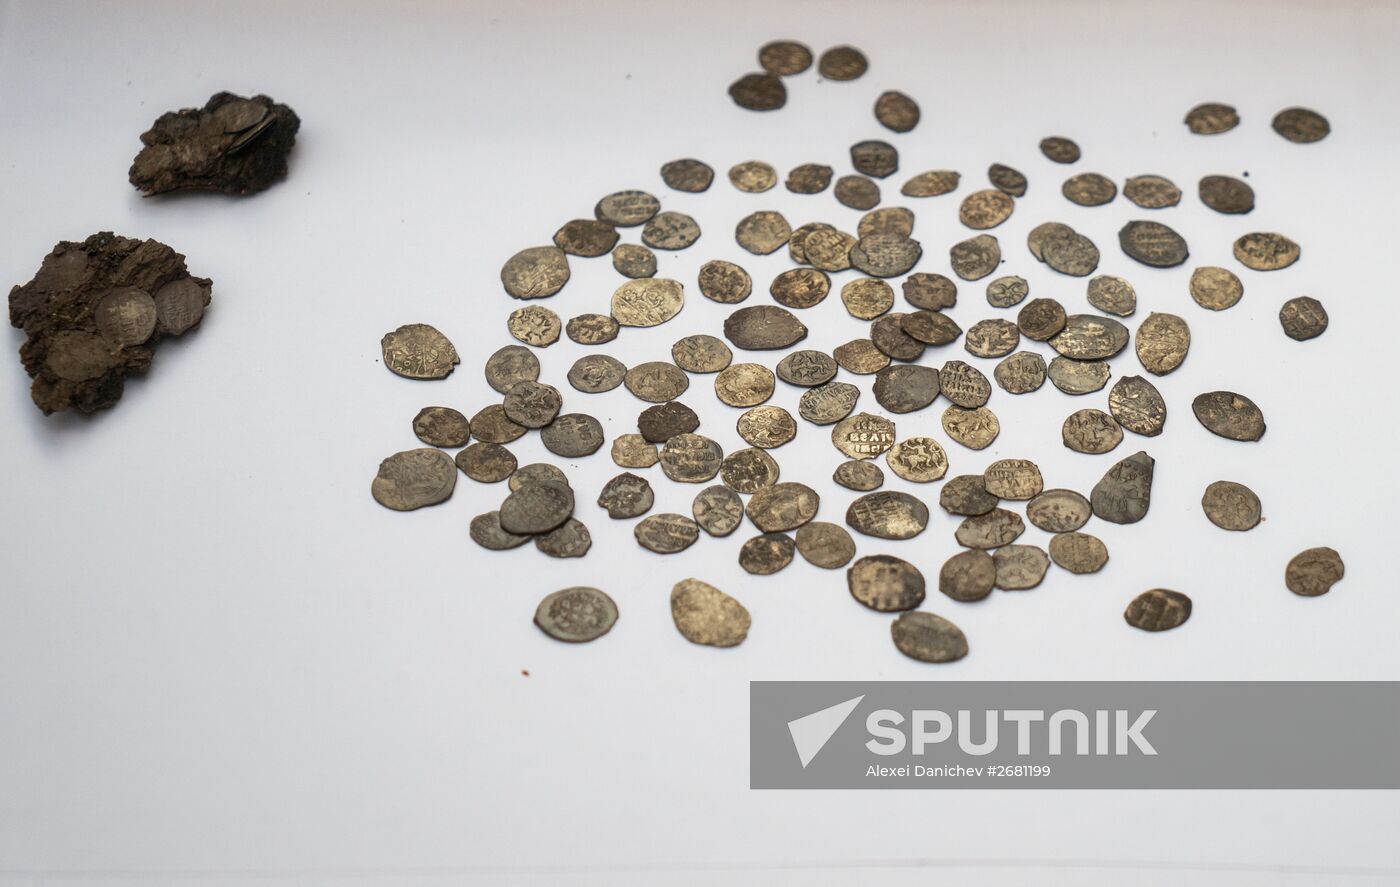 Archaeologists find a hoard dating back to Ivan the Terrible times in Old Ladoga Fortressthe Old